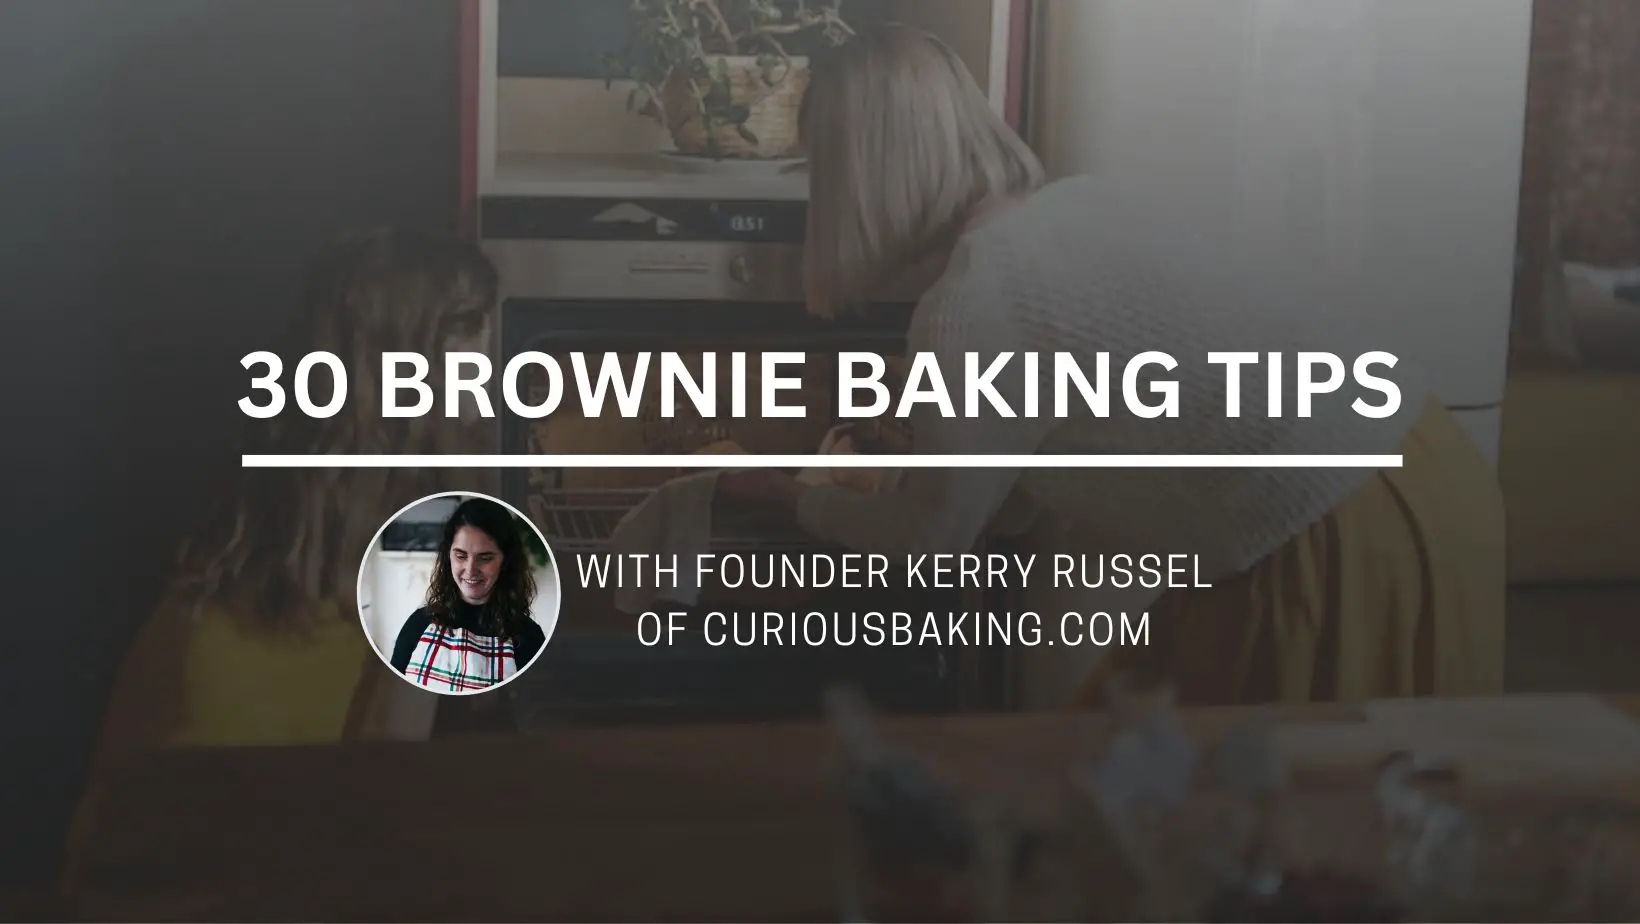 30 Brownie Baking Tips by CuriousBaking.com